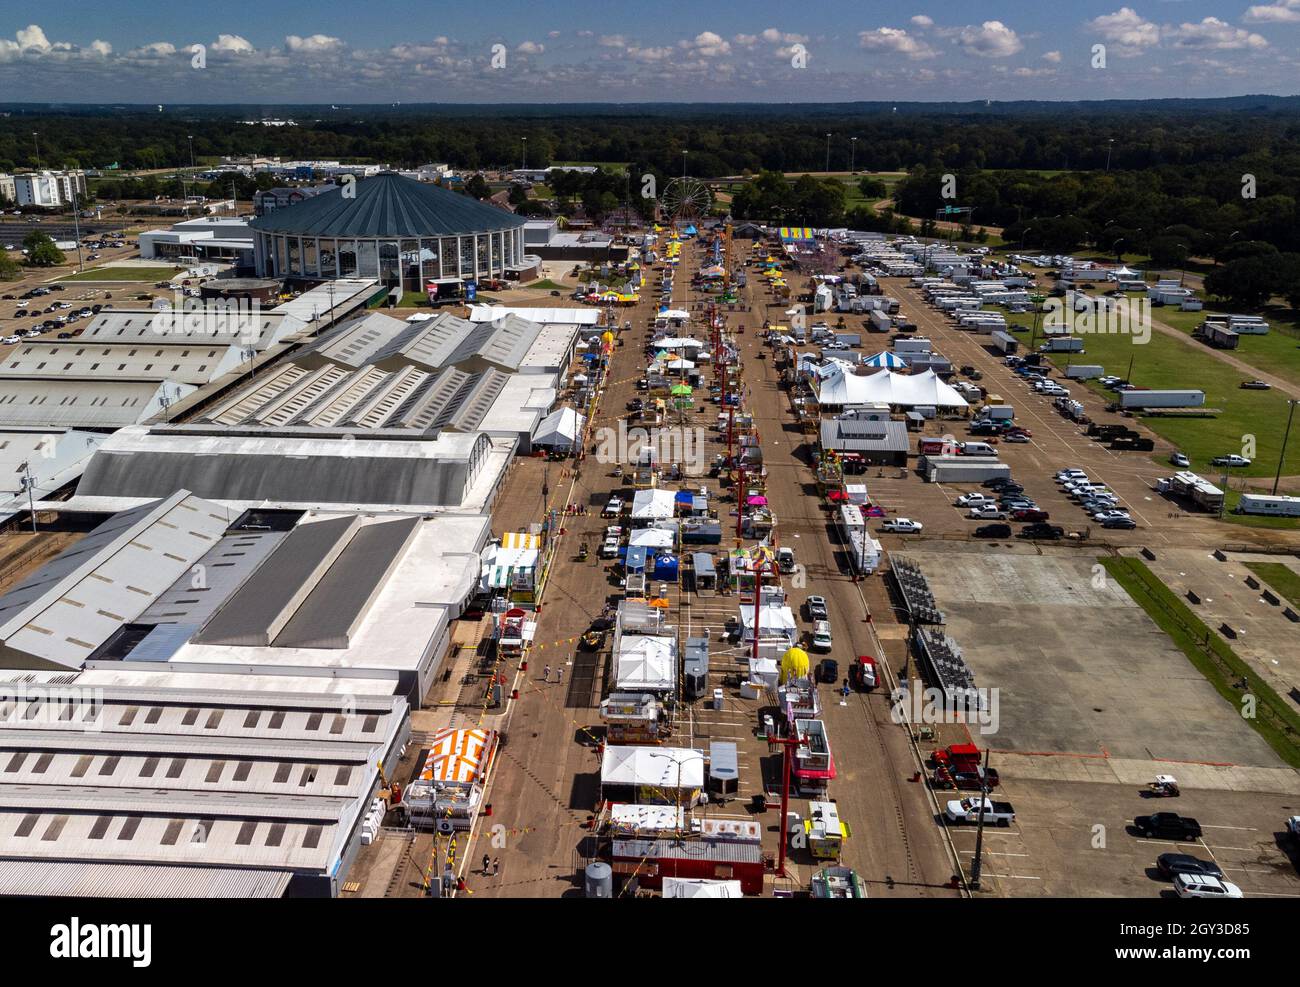 Jackson, MS - October 6, 2021: Mississippi State Fairgrounds during the State Fair. Stock Photo